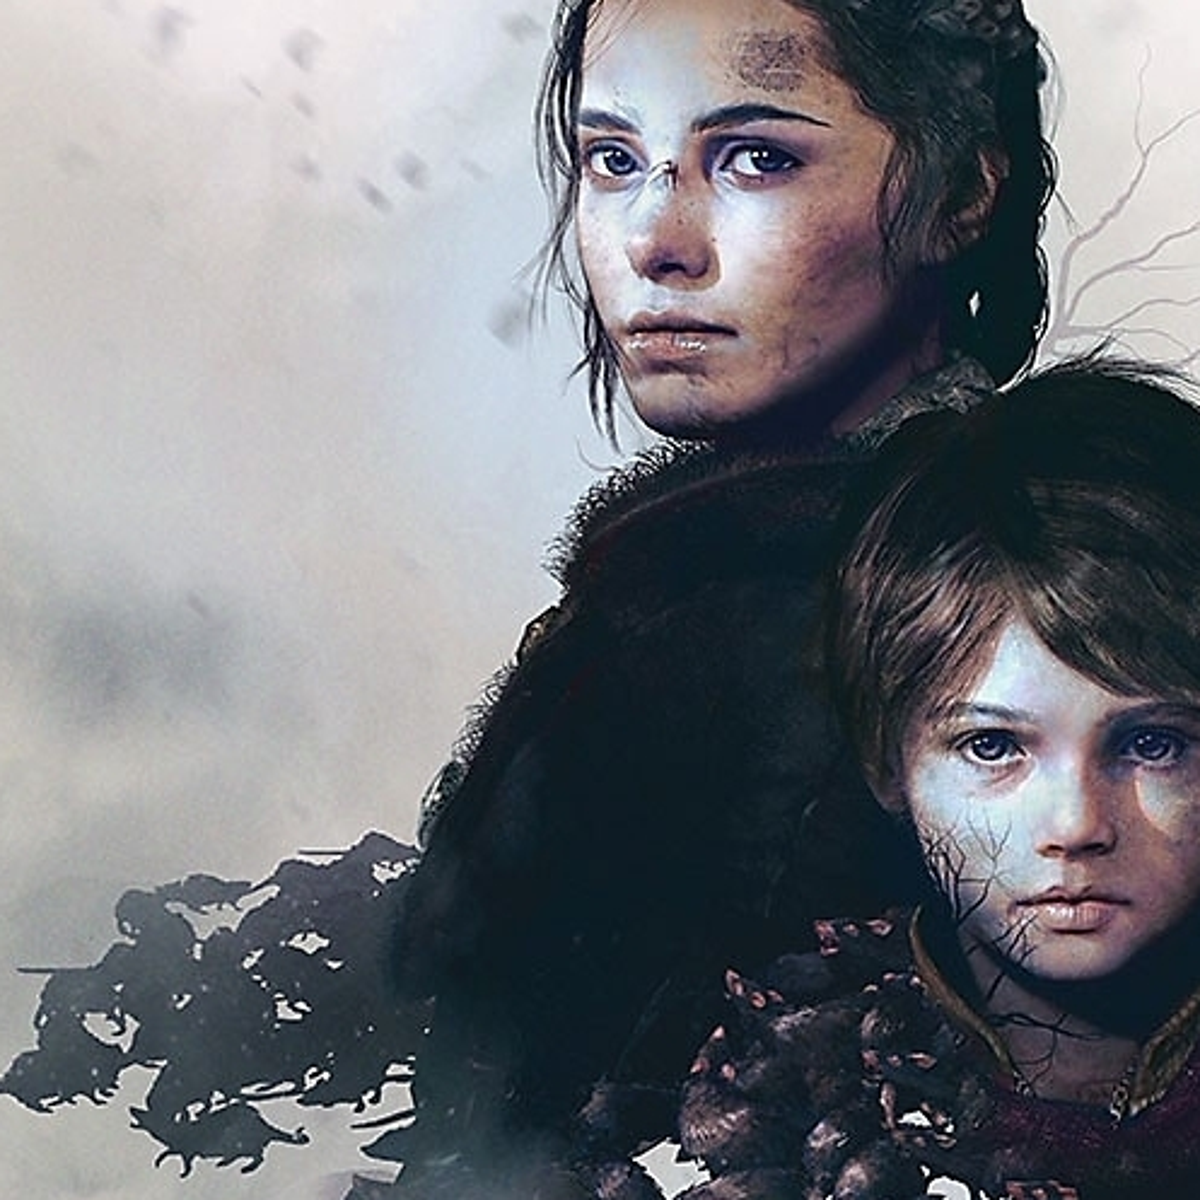 A Plague Tale: Innocence Developer Shares Comments About the Ease